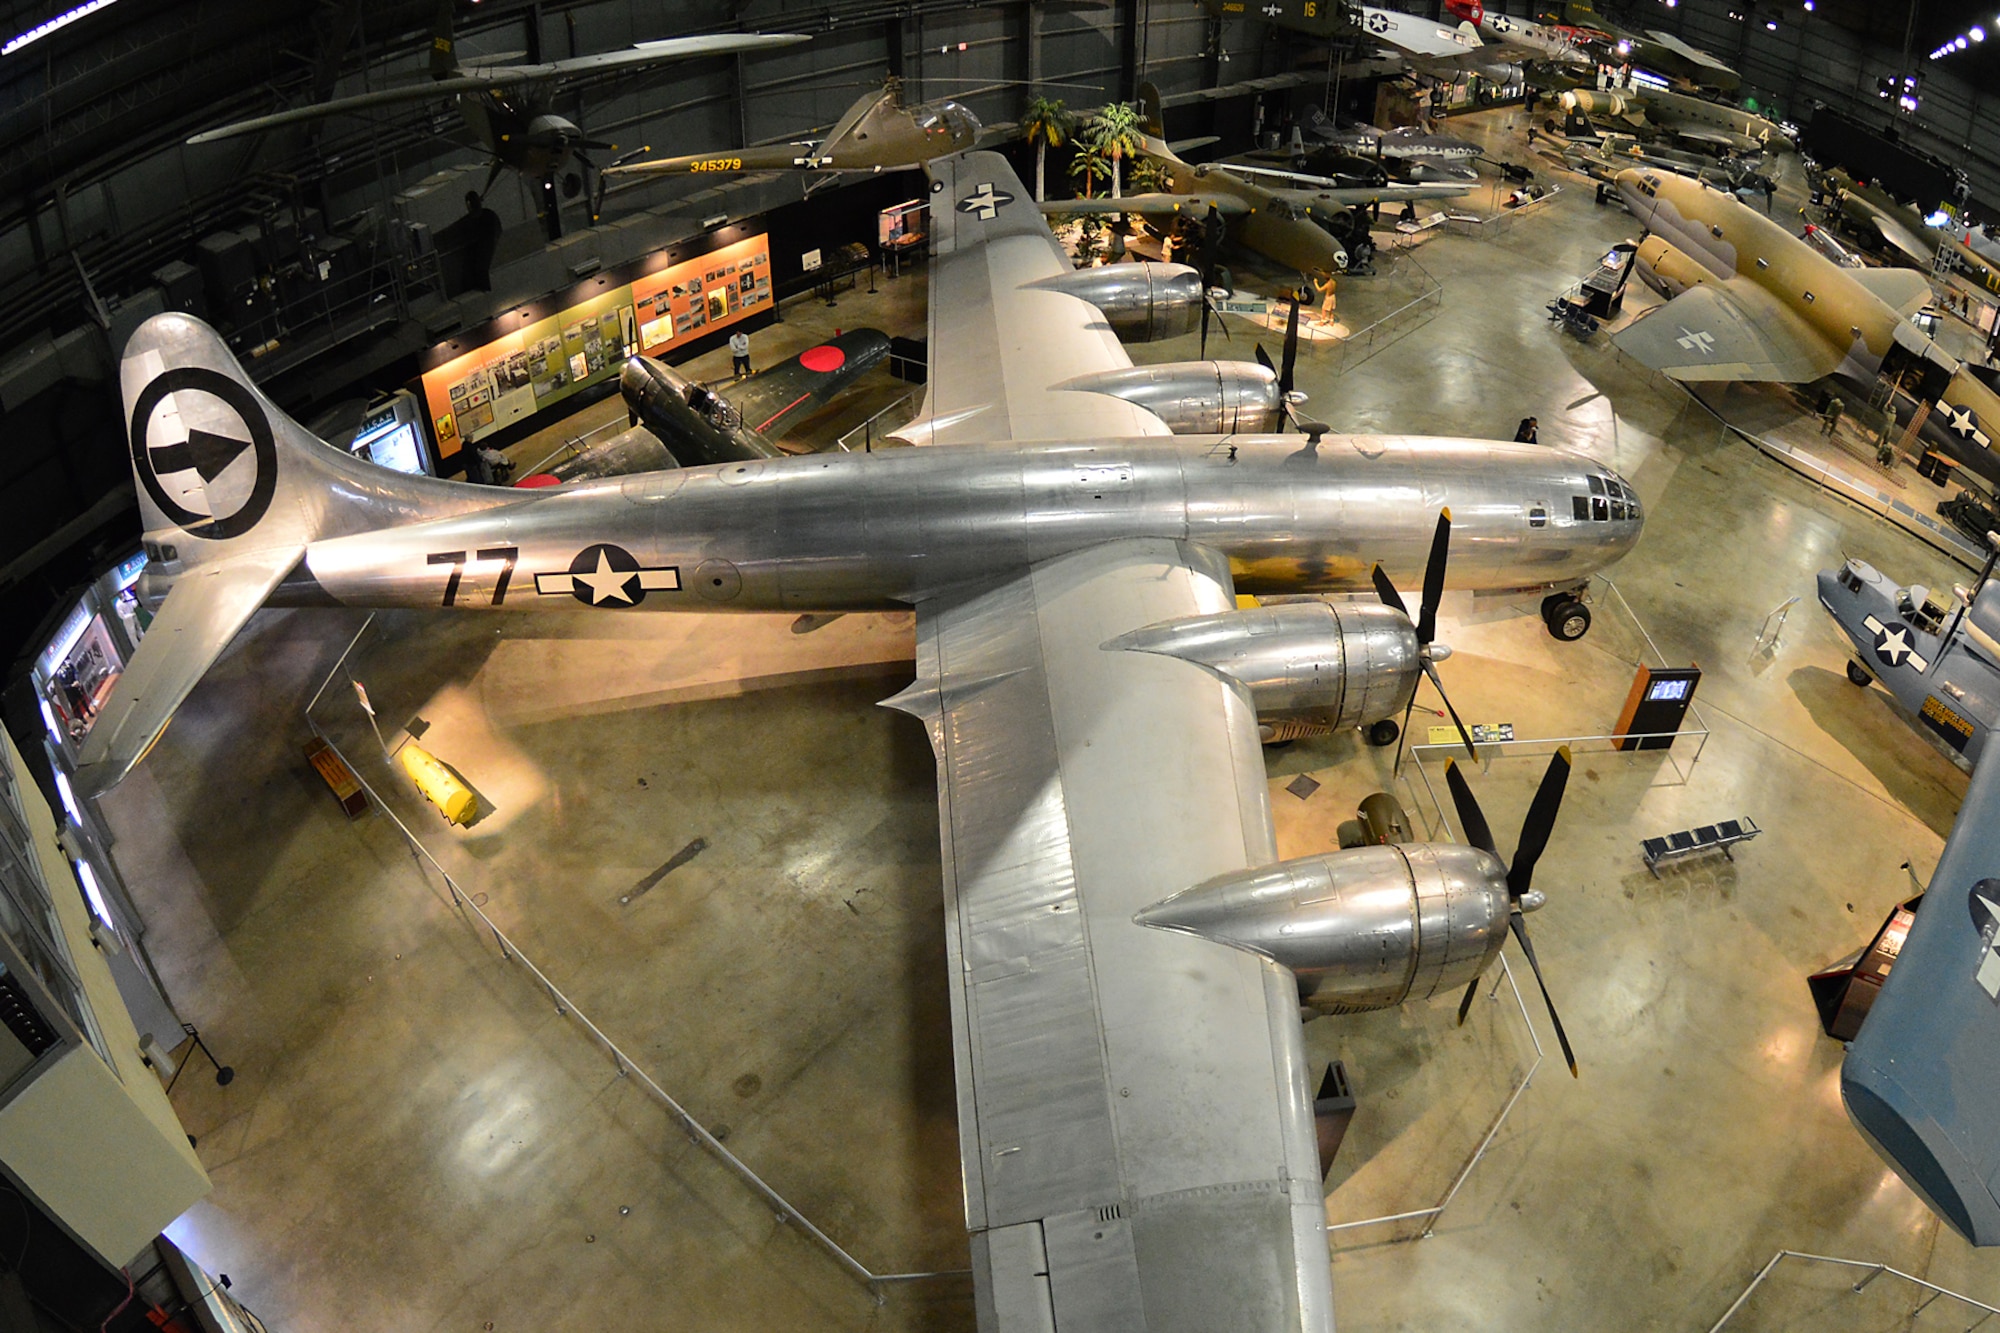 DAYTON, Ohio -- Boeing B-29 Superfortress "Bockscar" in the World War II Gallery at the National Museum of the United States Air Force. (U.S. Air Force photo)
